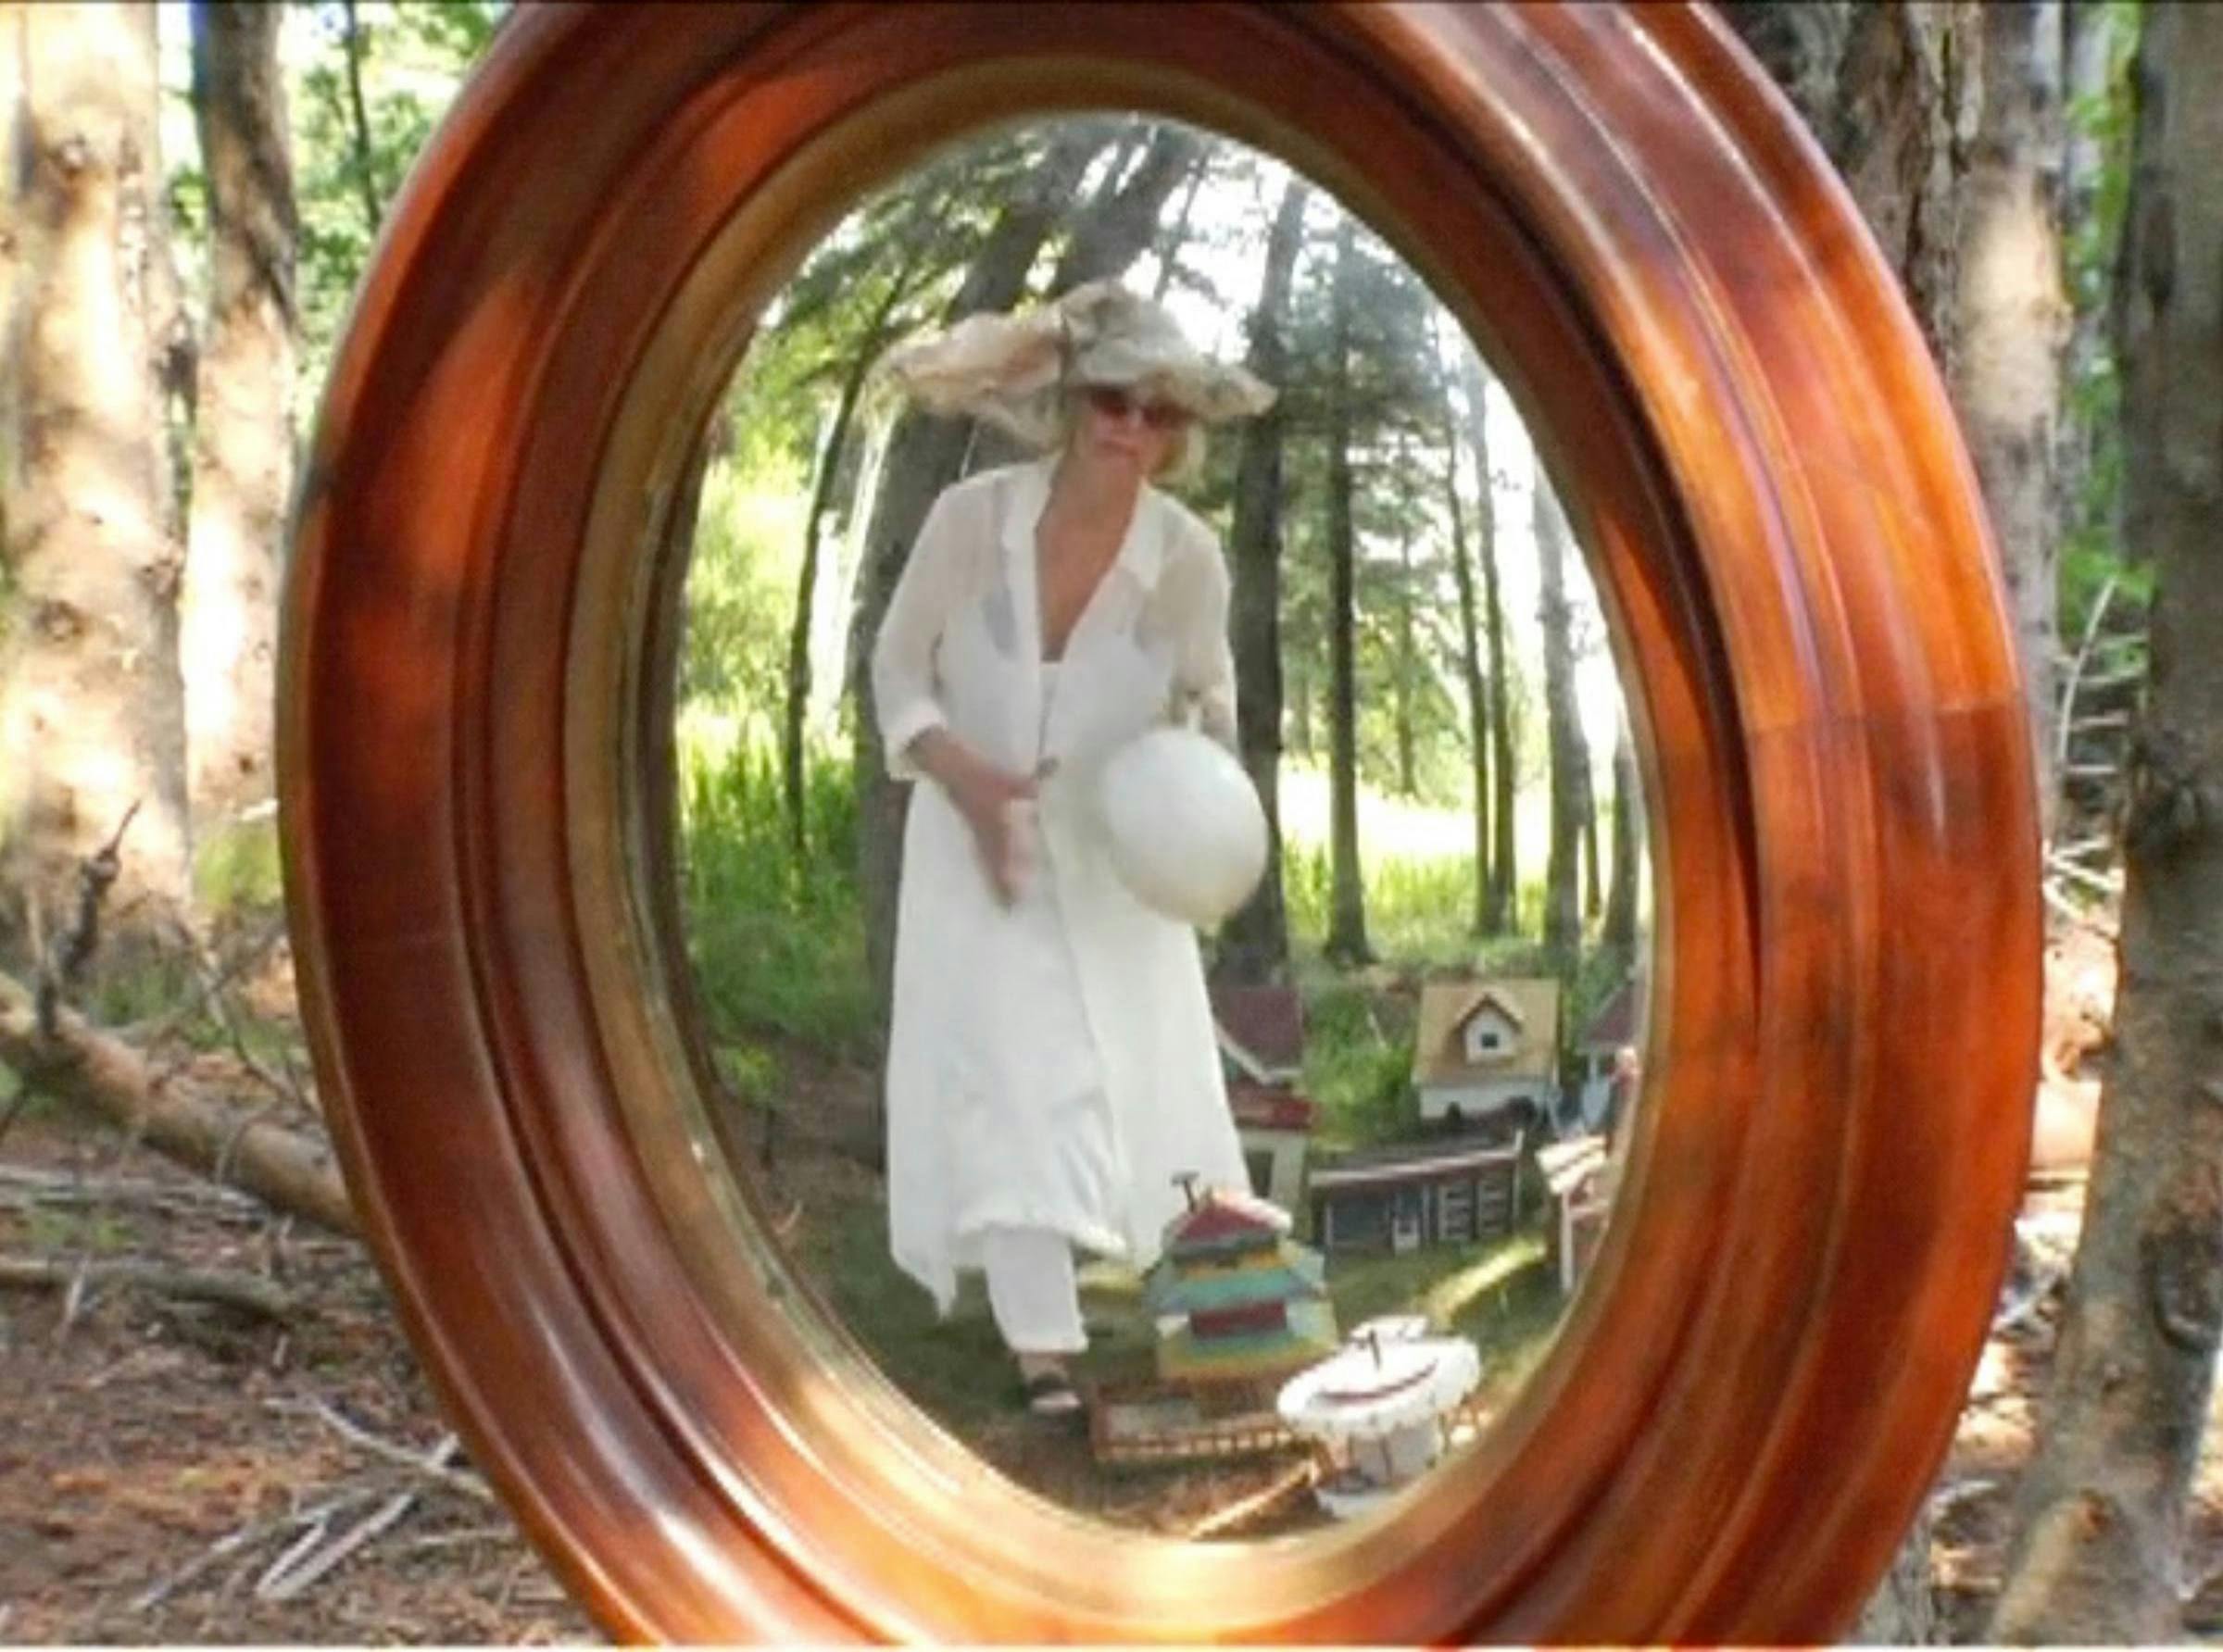 An image of the artist dressed in white and standing in a garden. She is wearing sunglasses. She is peering through a wooden window at us